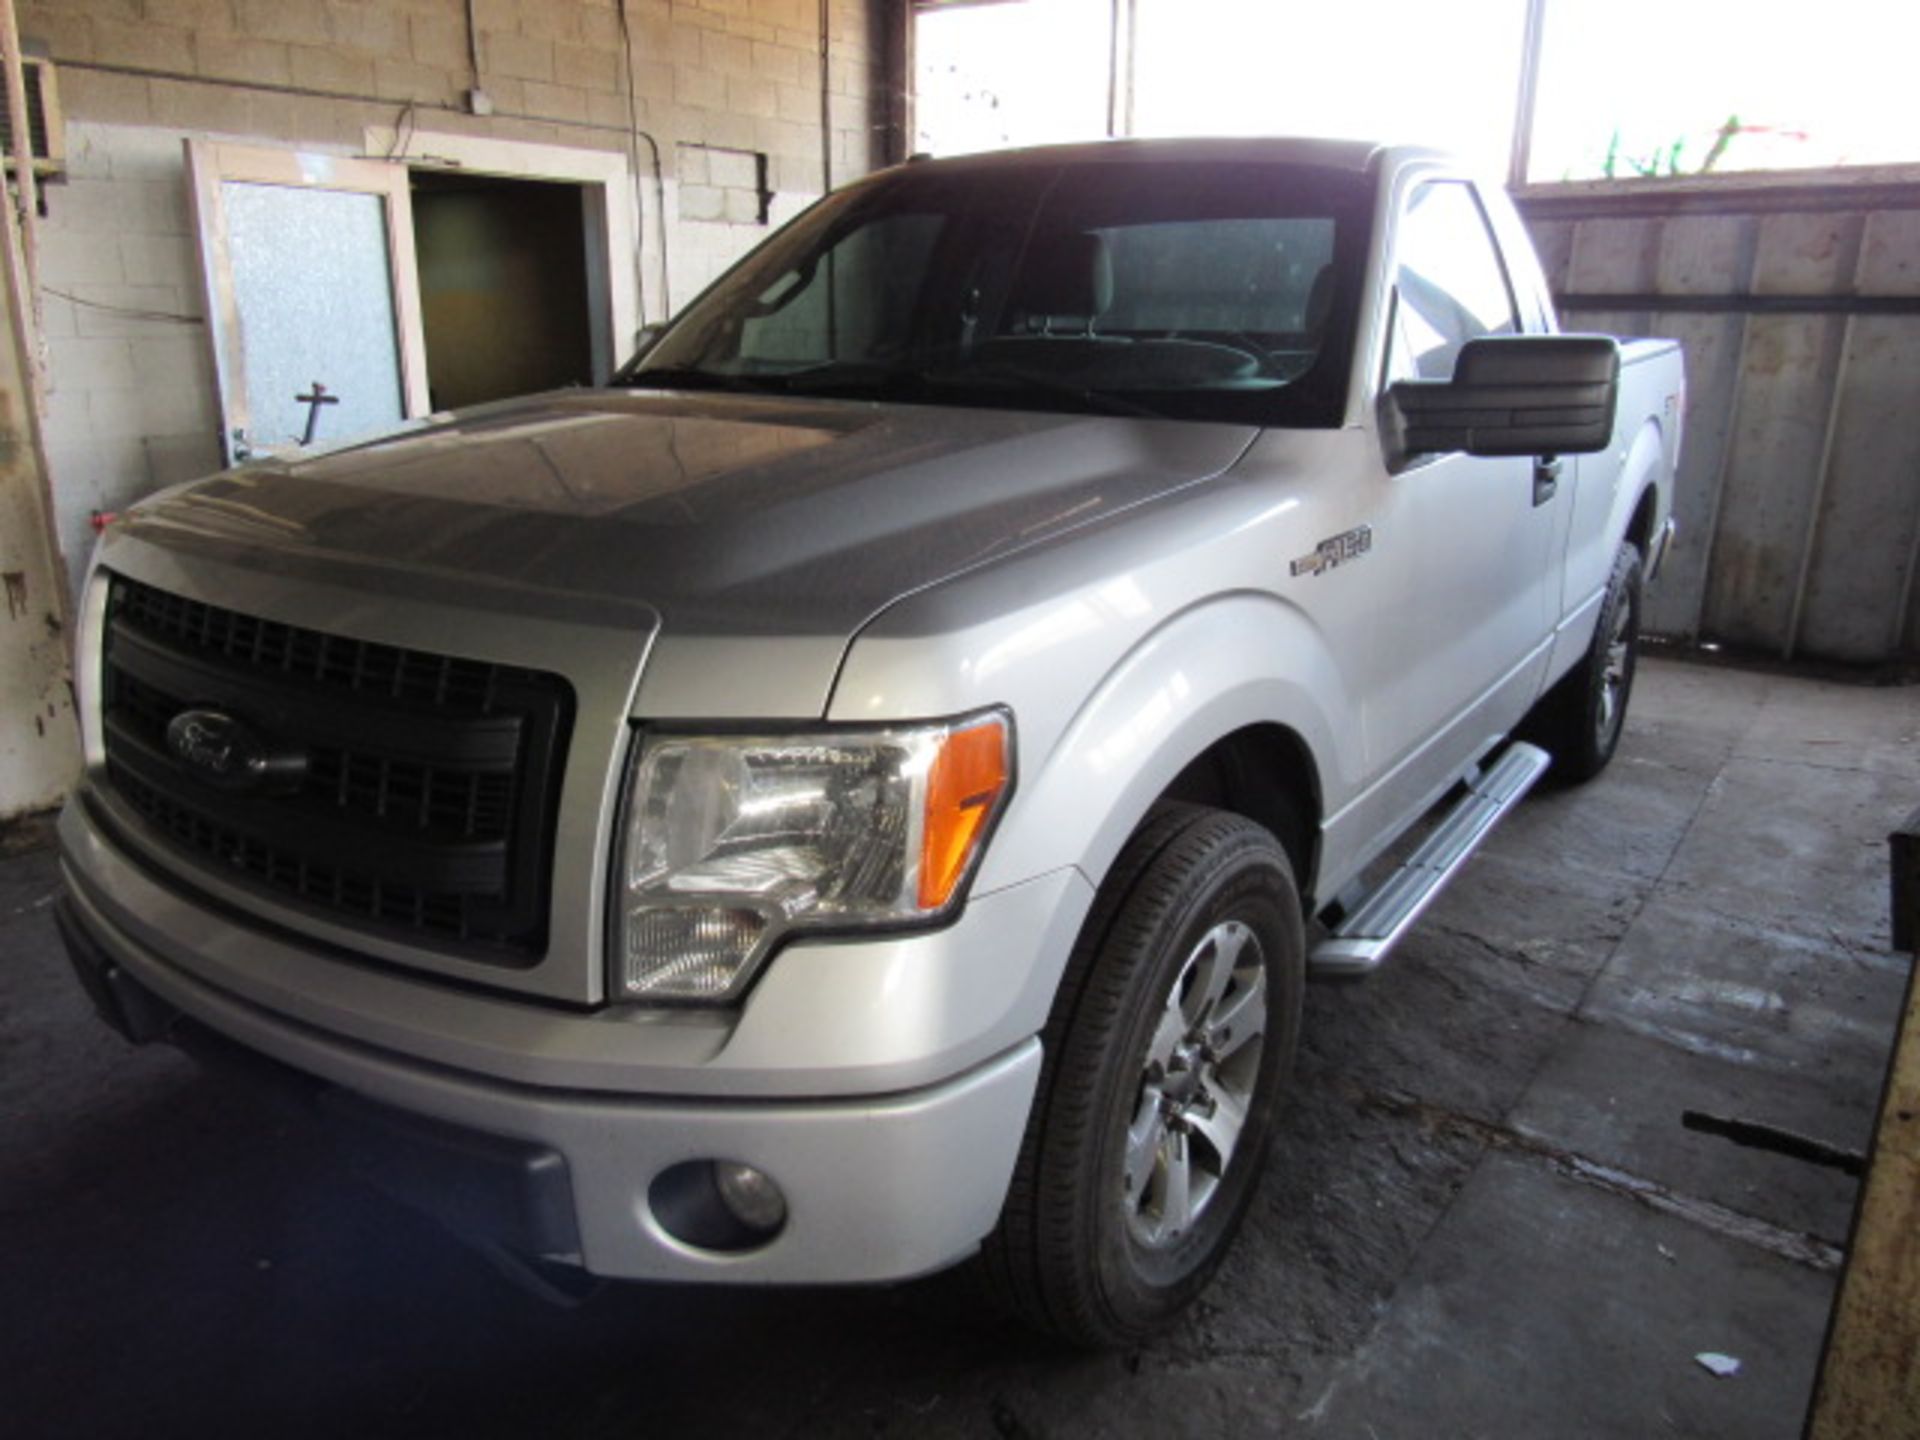 Ford F150 STX Pickup Truck - Image 2 of 5